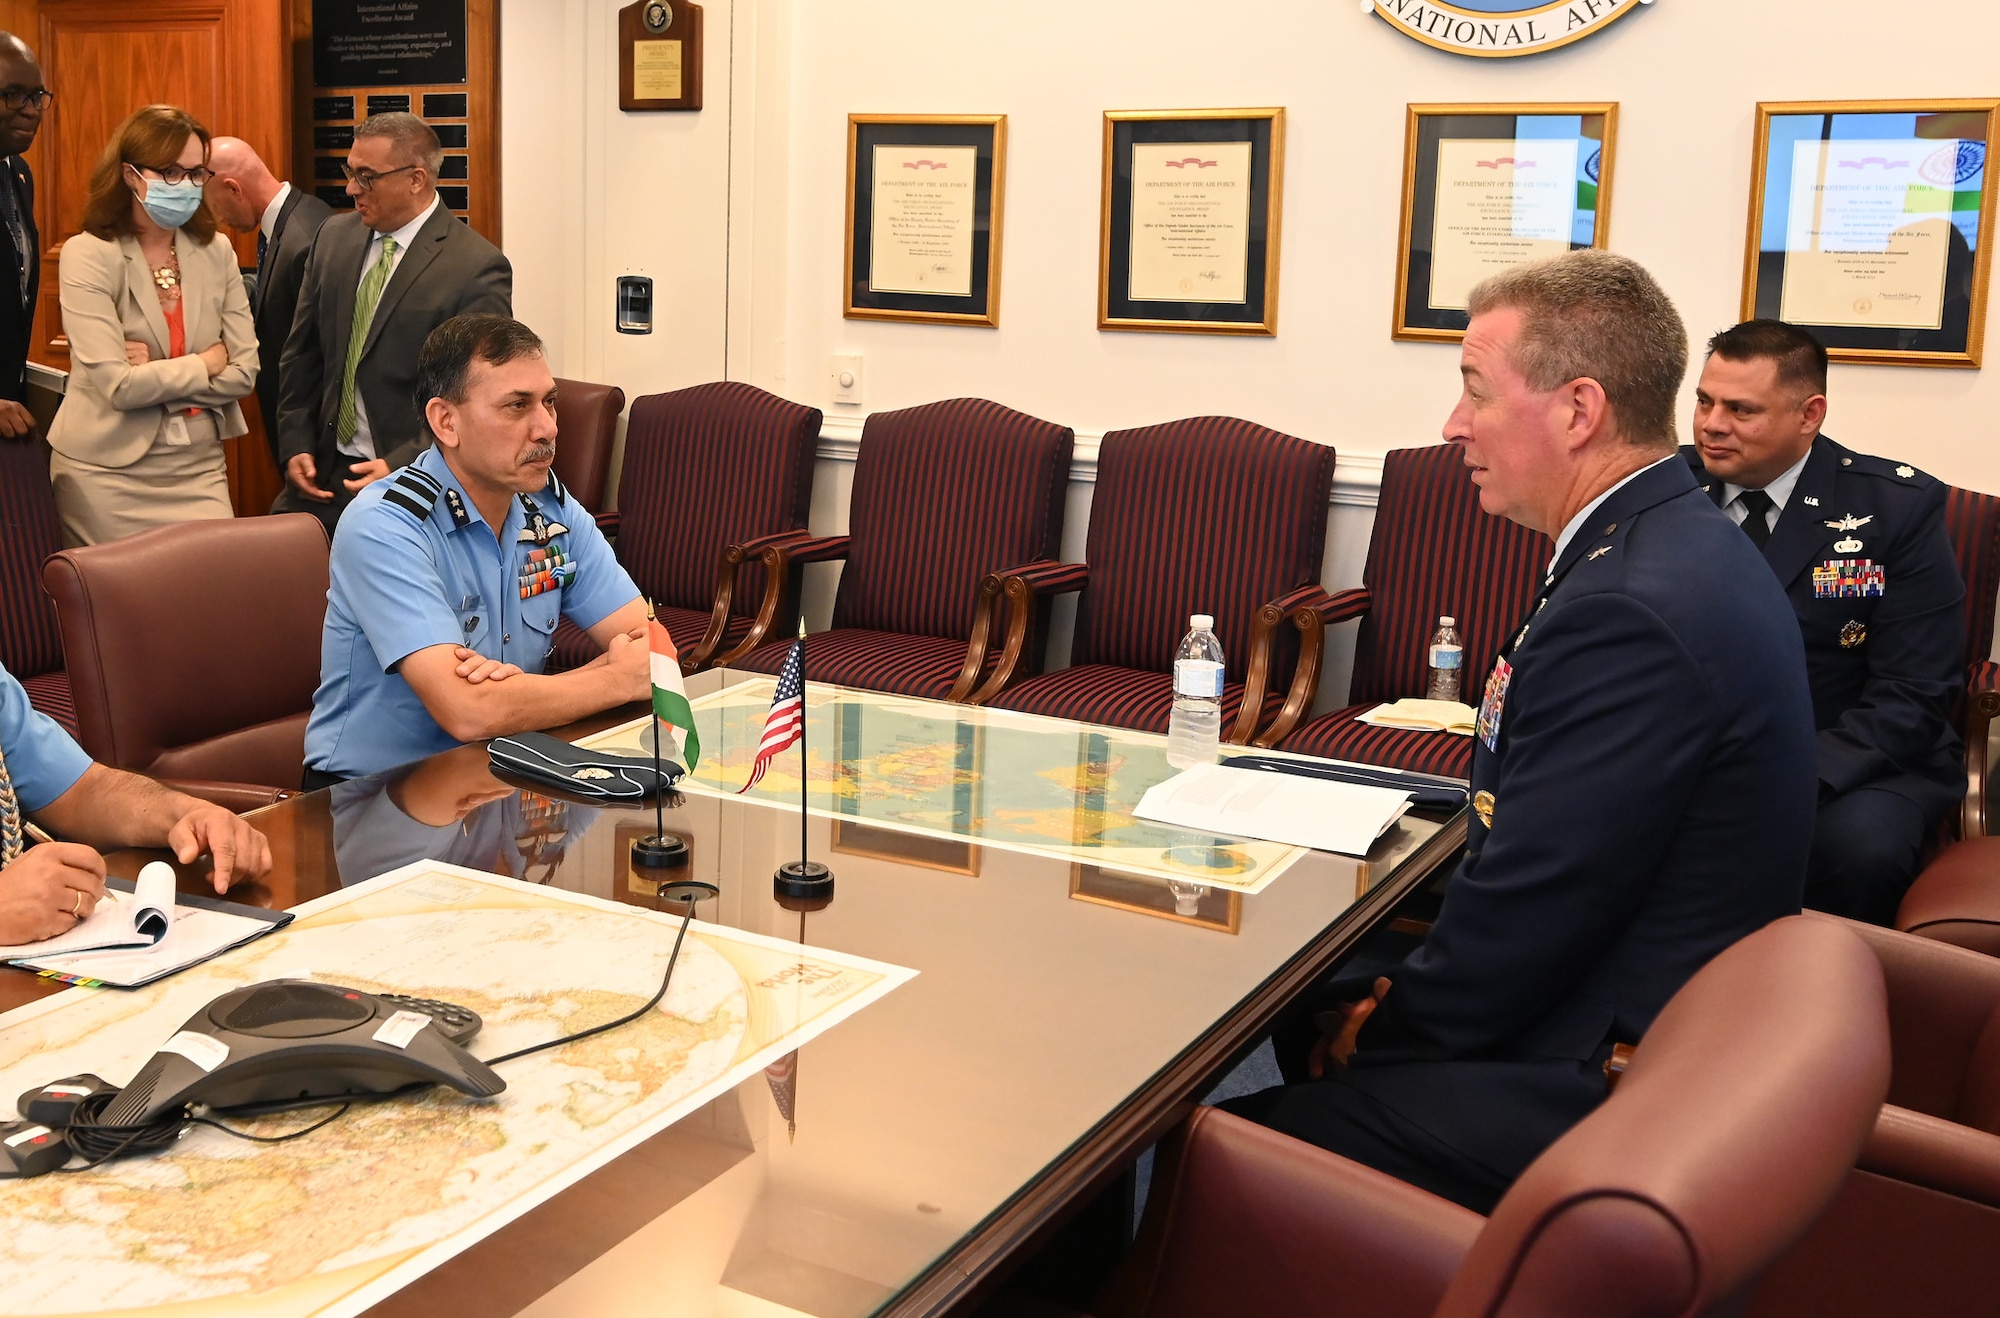 Brig. Gen. Brian Bruckbauer hosts an office call in honor of his fellow cochair of the US-India Defense Technology and Trade Initiative Air Vice Marshal Narmdeshwar Tiwari in the Pentagon, Arlington, Va., July 16, 2021. (U.S Air Force photo by Andy Morataya)